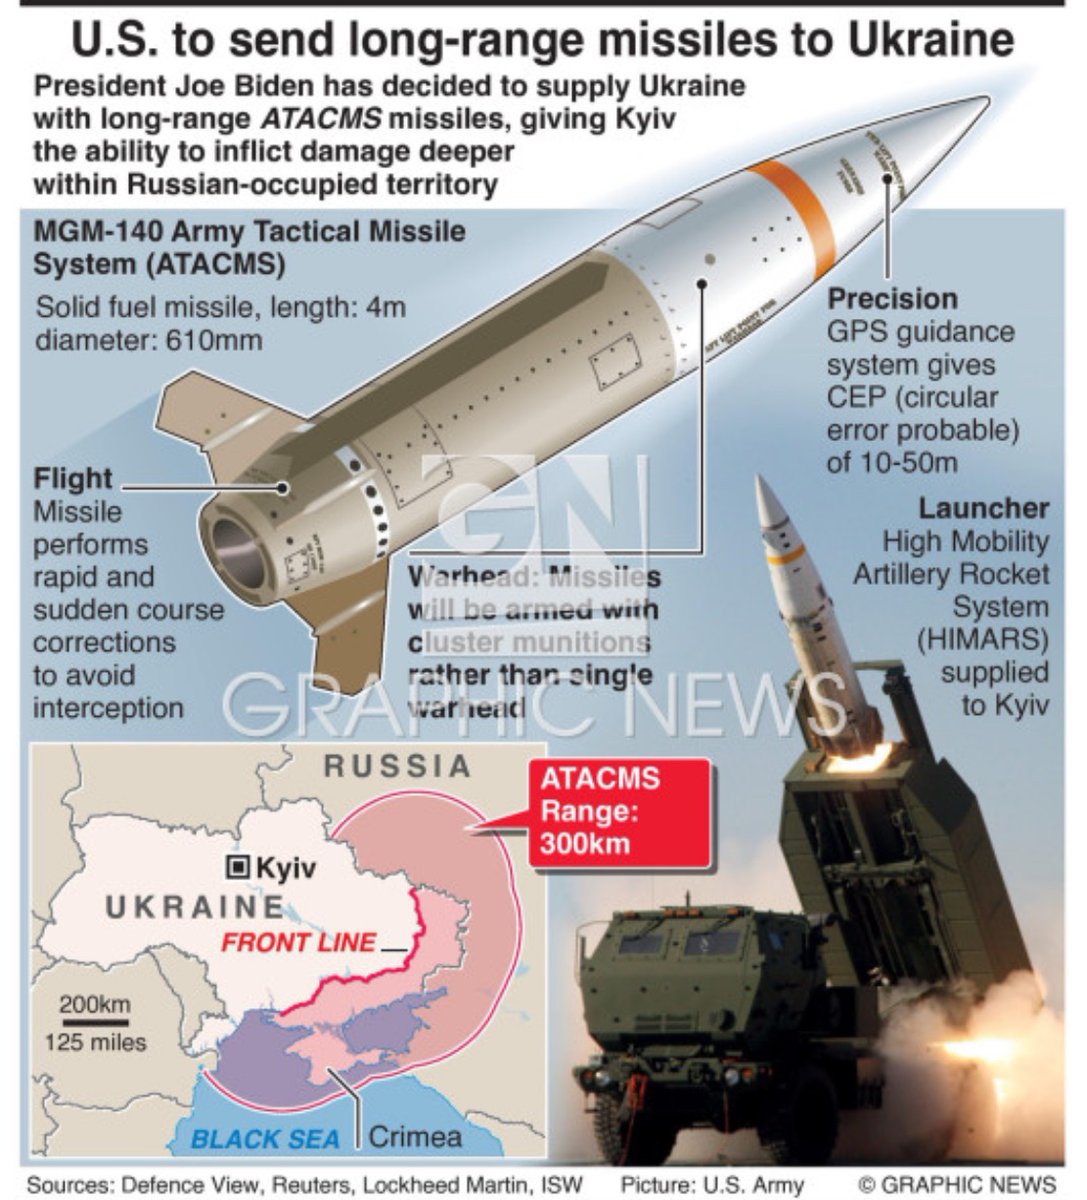 A simple infographic on how ATACMS (Army Tactical Missile System) work.